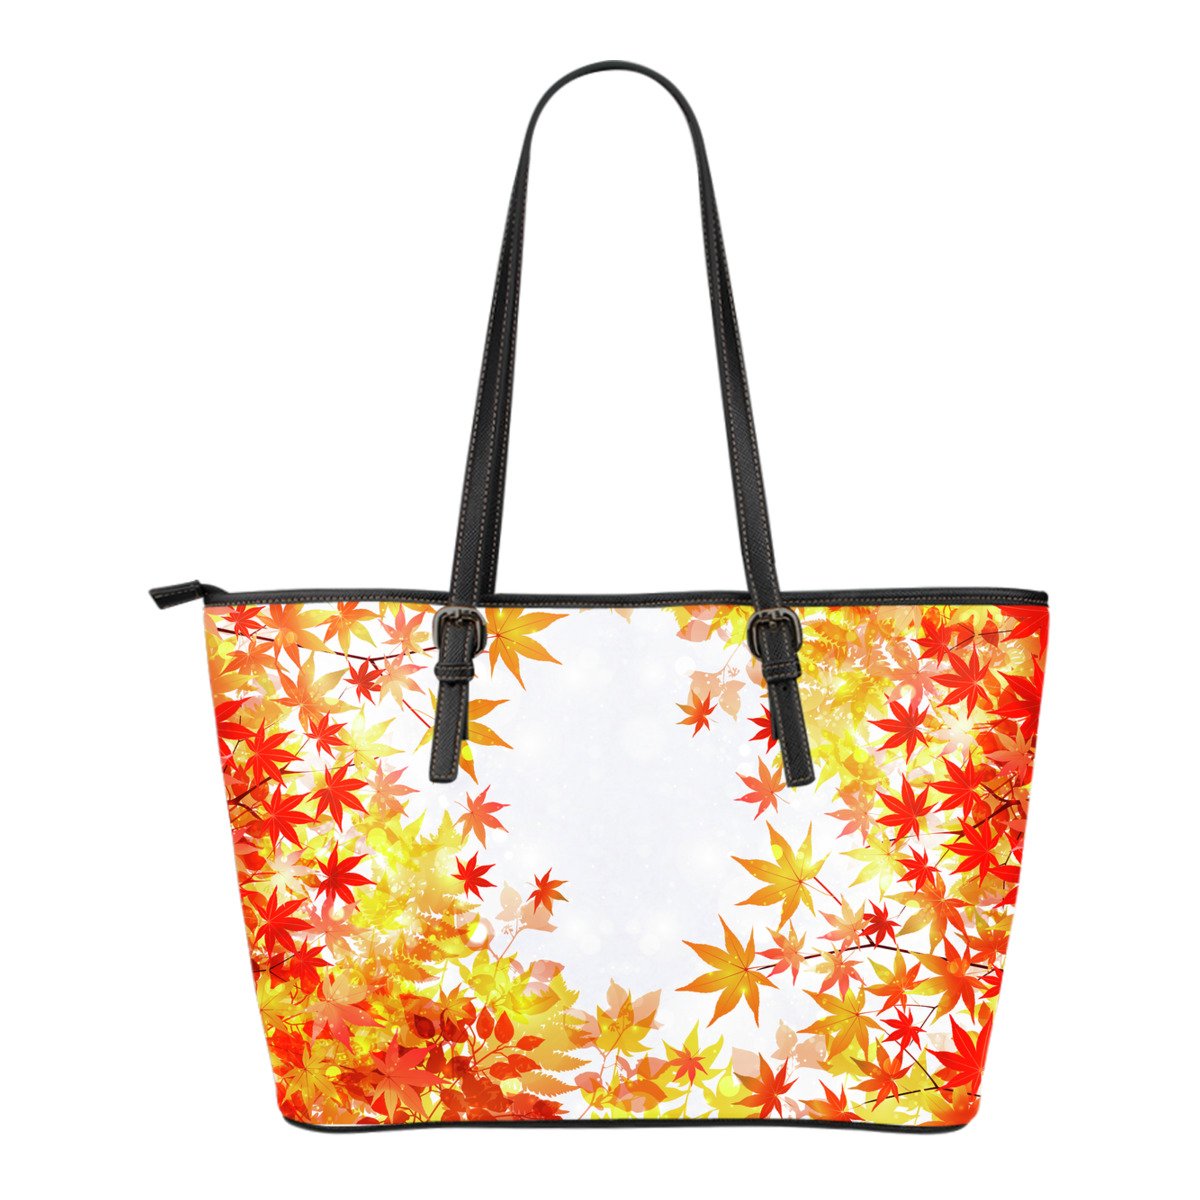 canada-maple-leaf-01-small-leather-tote-bags